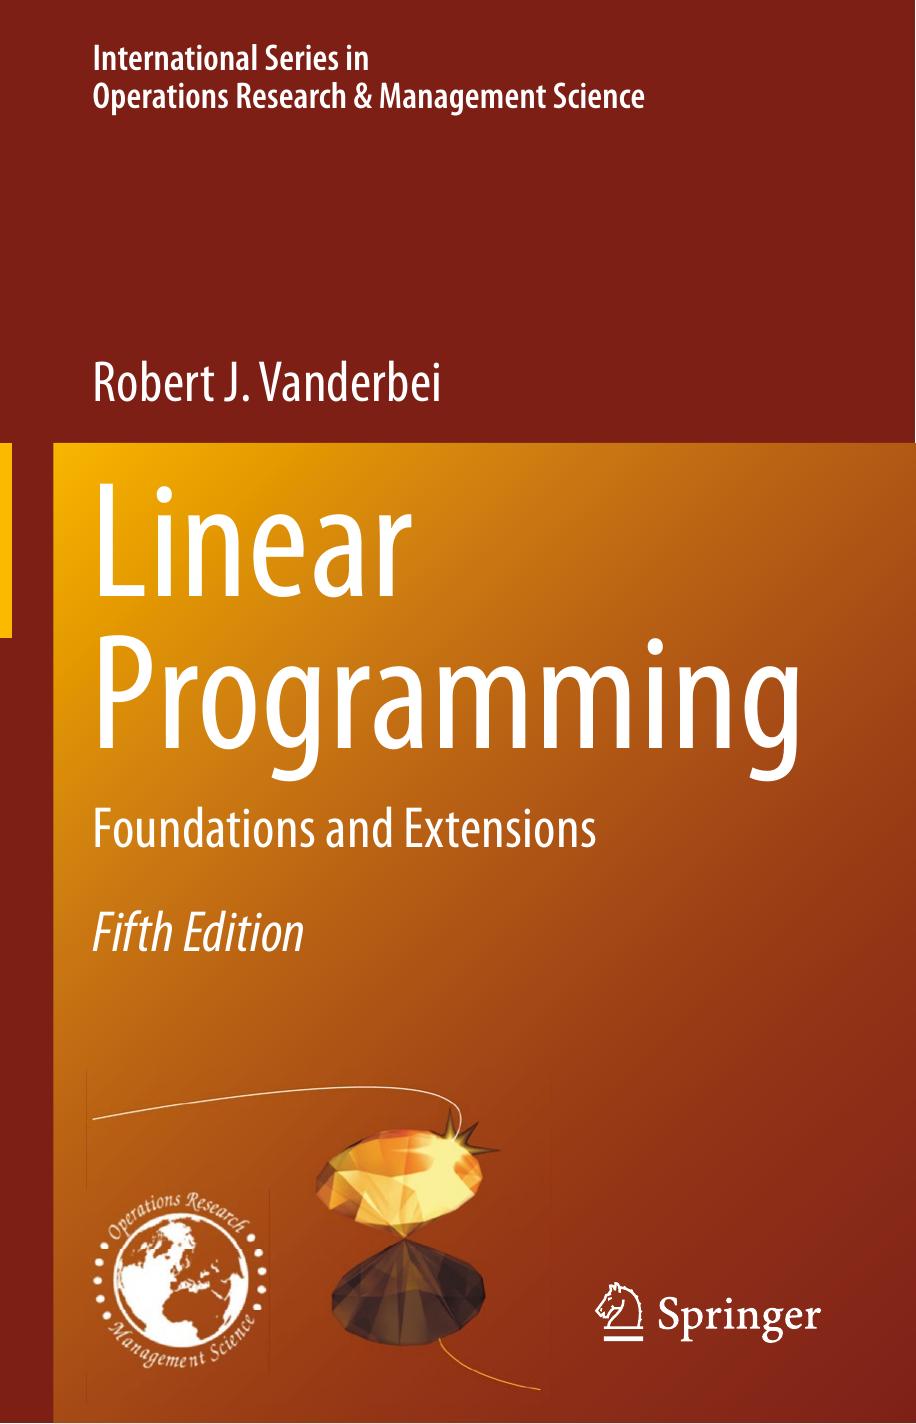 Linear Programming. Foundations and Extensions by Robert J. Vanderbei